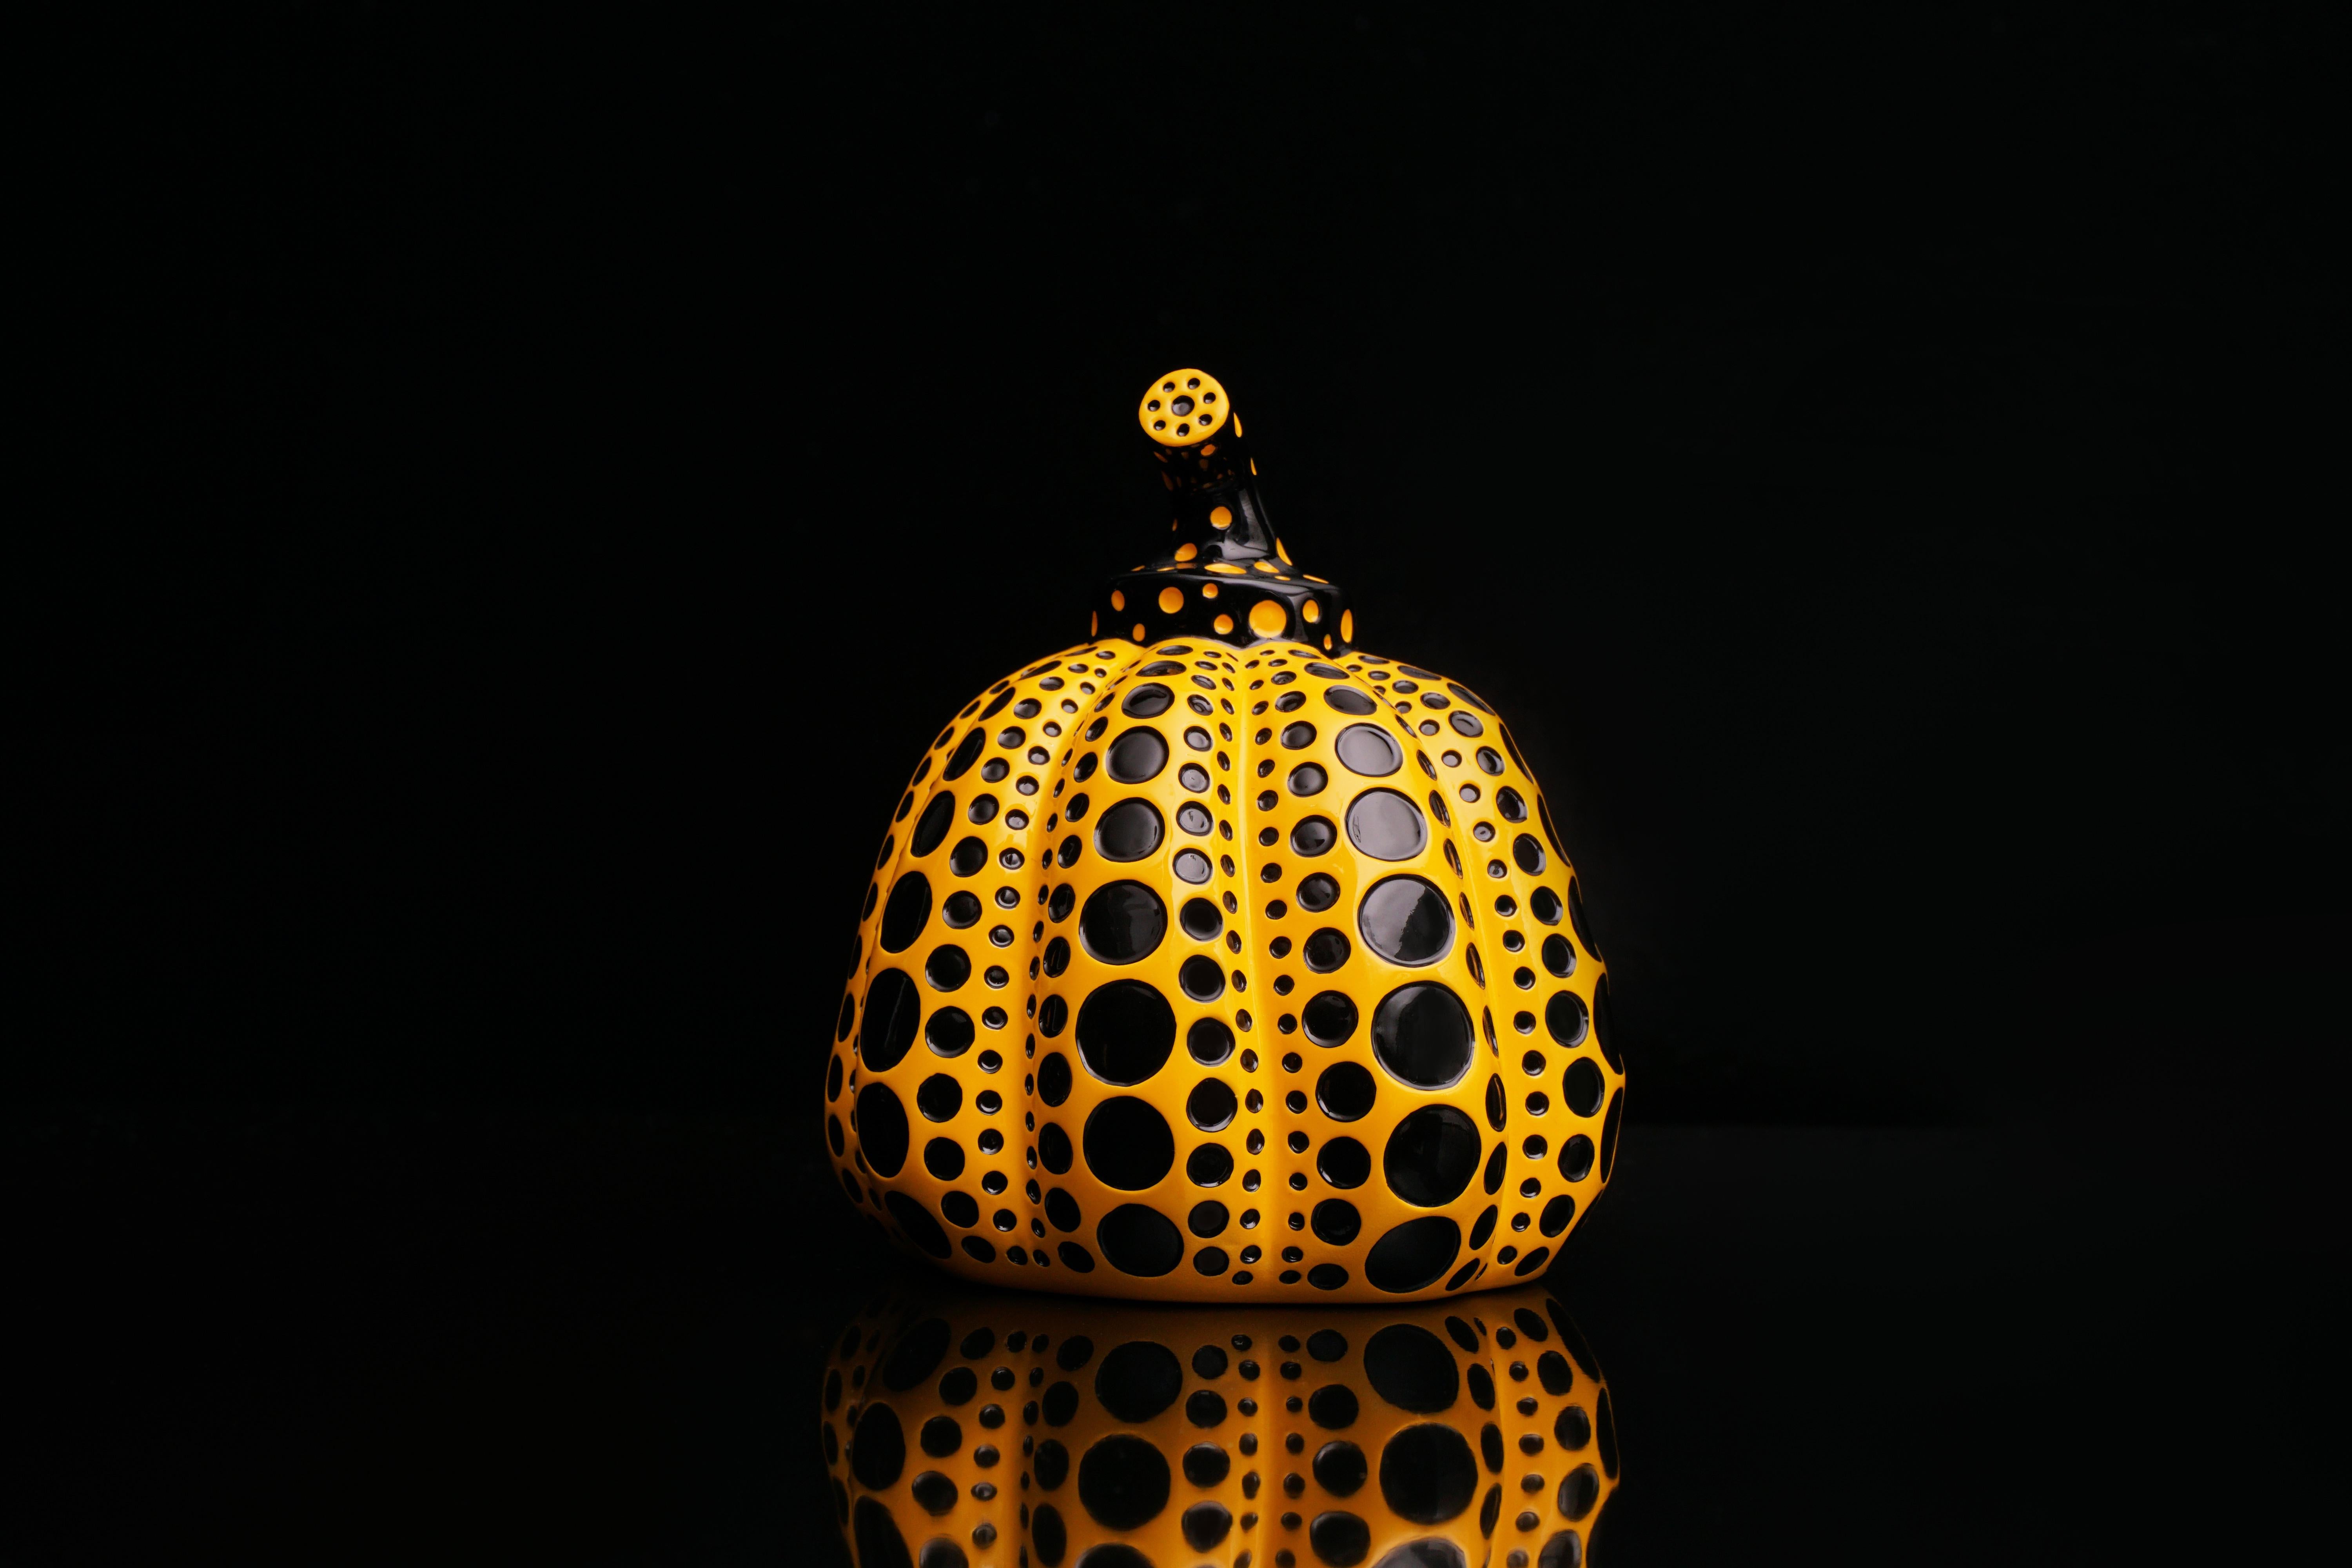 The ’Pumpkin'  sculpture is a polka-dotted painted lacquer resin collectible art object by the legendary contemporary Artist, Yayoi Kusama. Published by Benesse Holdings, Inc., Naoshima, Japan. Created in 2016, the polka-dot pumpkin series is a